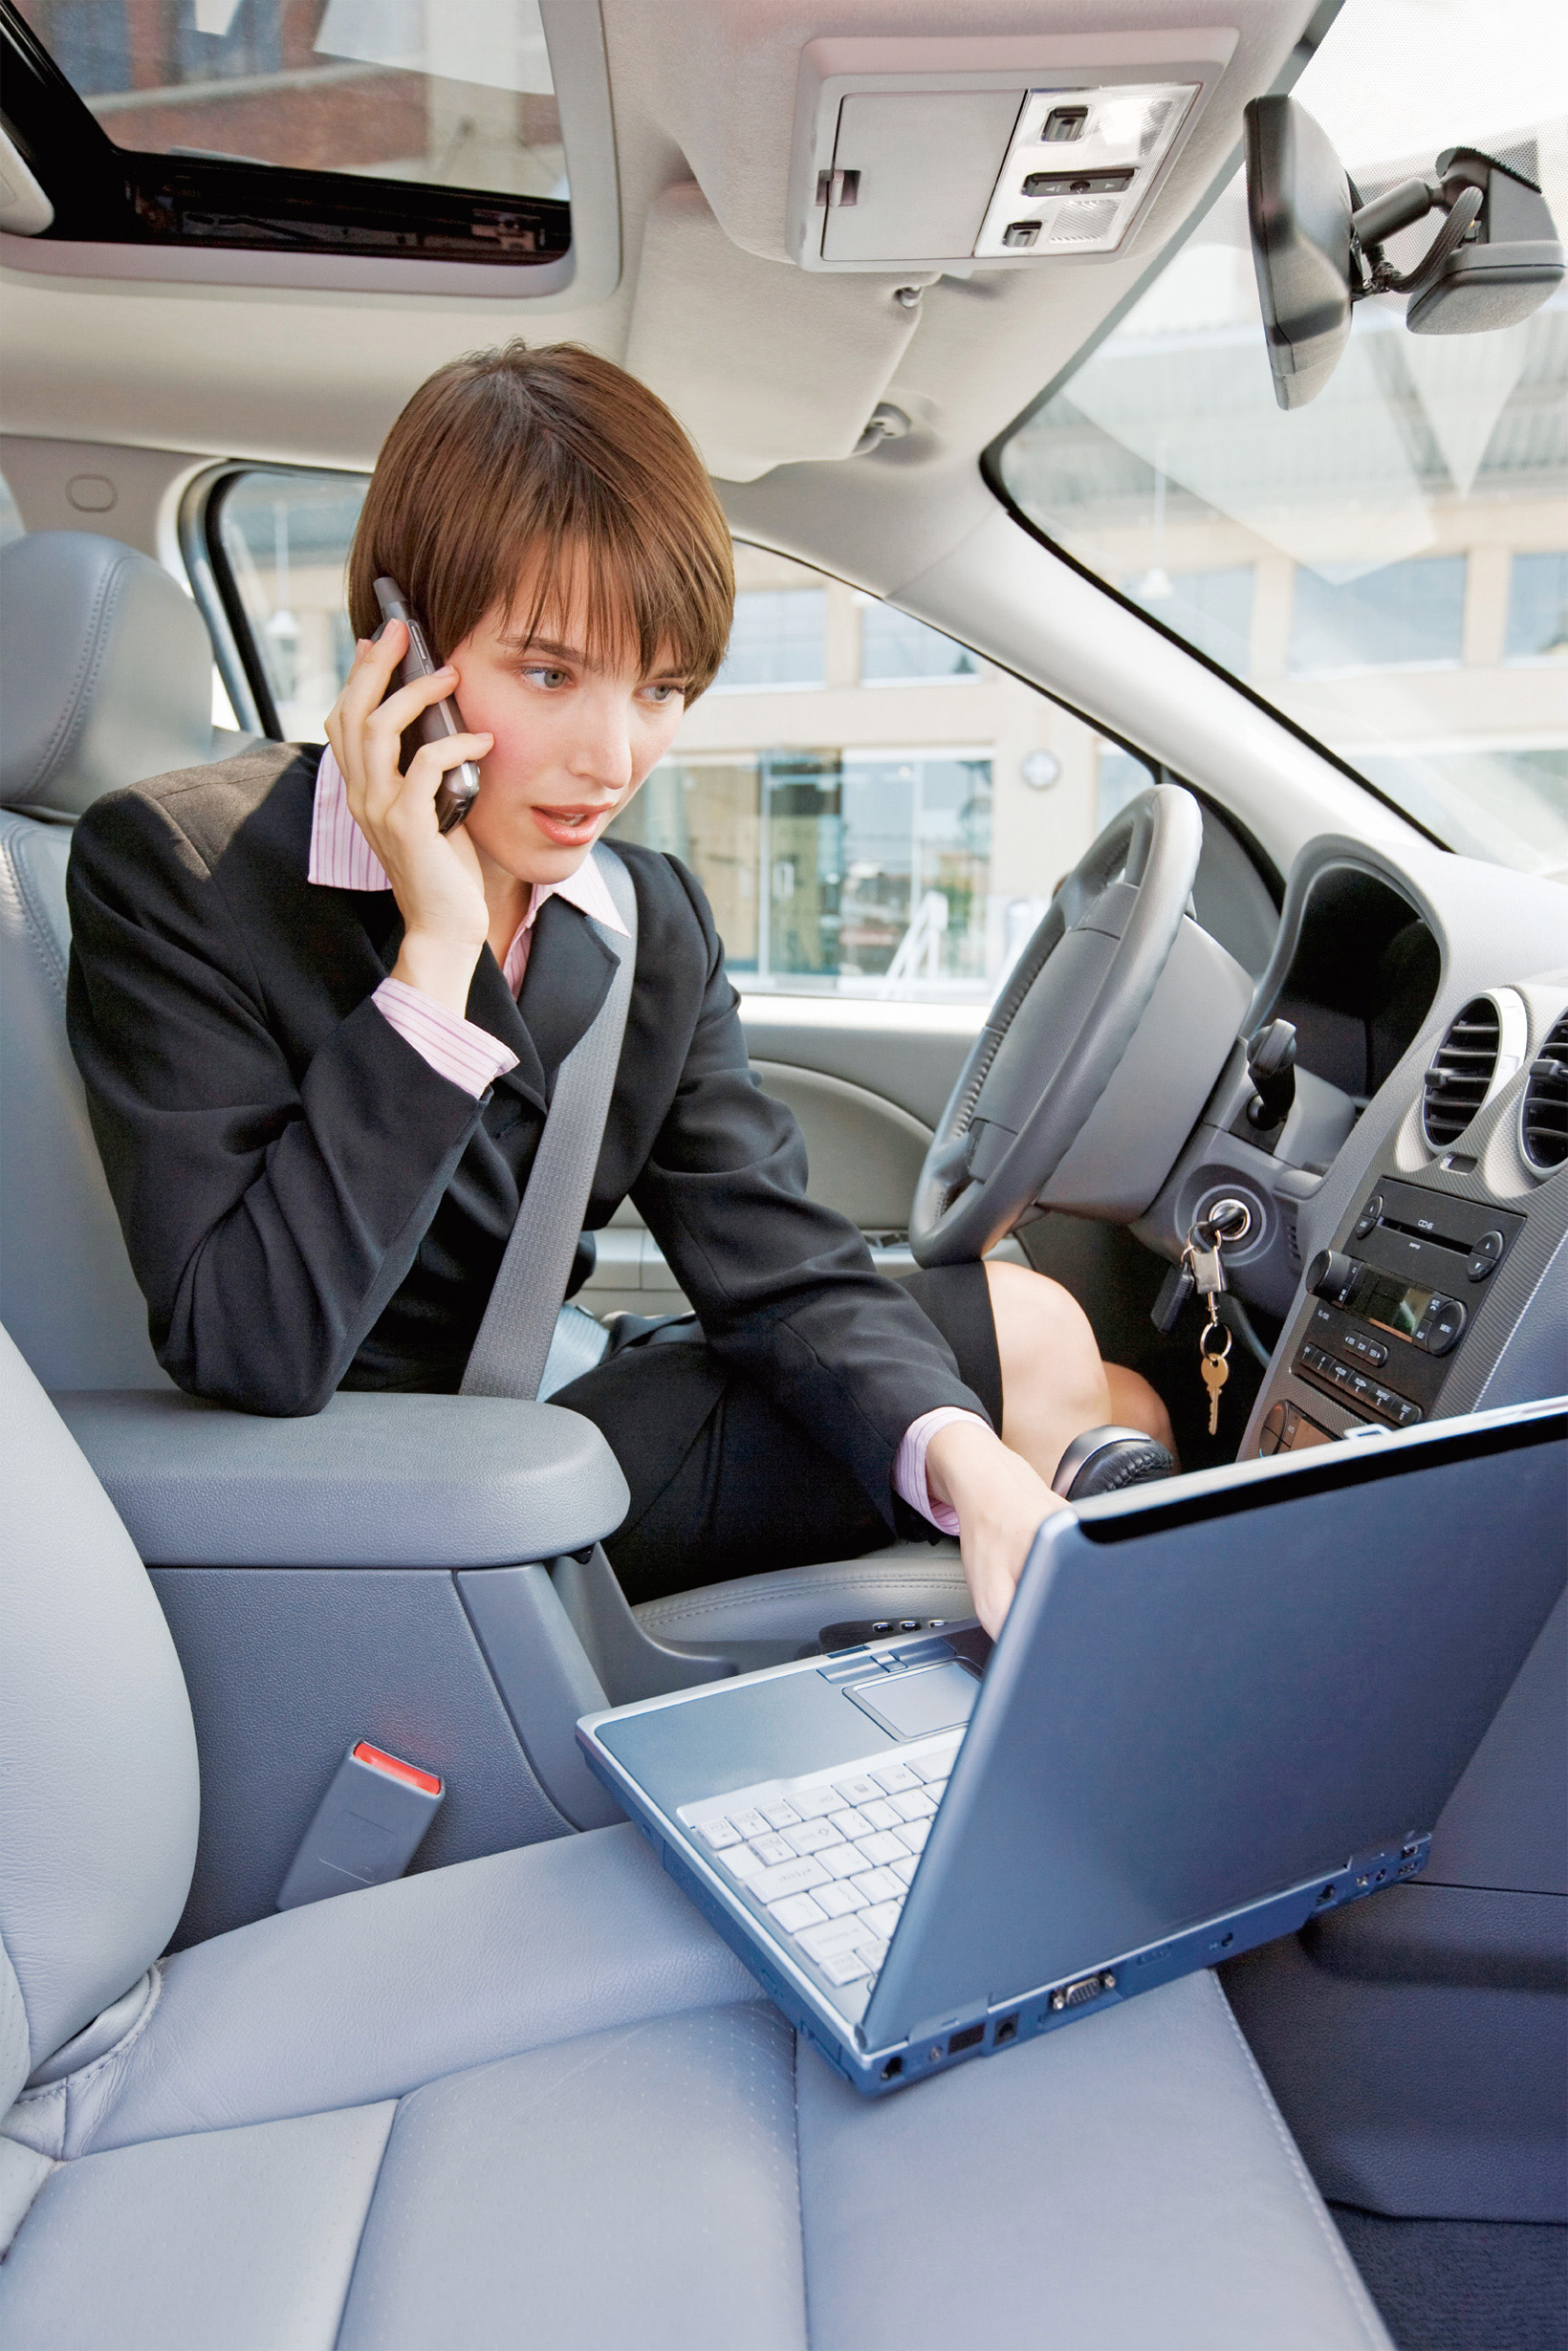 A photo shows a formally dressed young woman speaking over the phone while accessing a laptop inside a car.